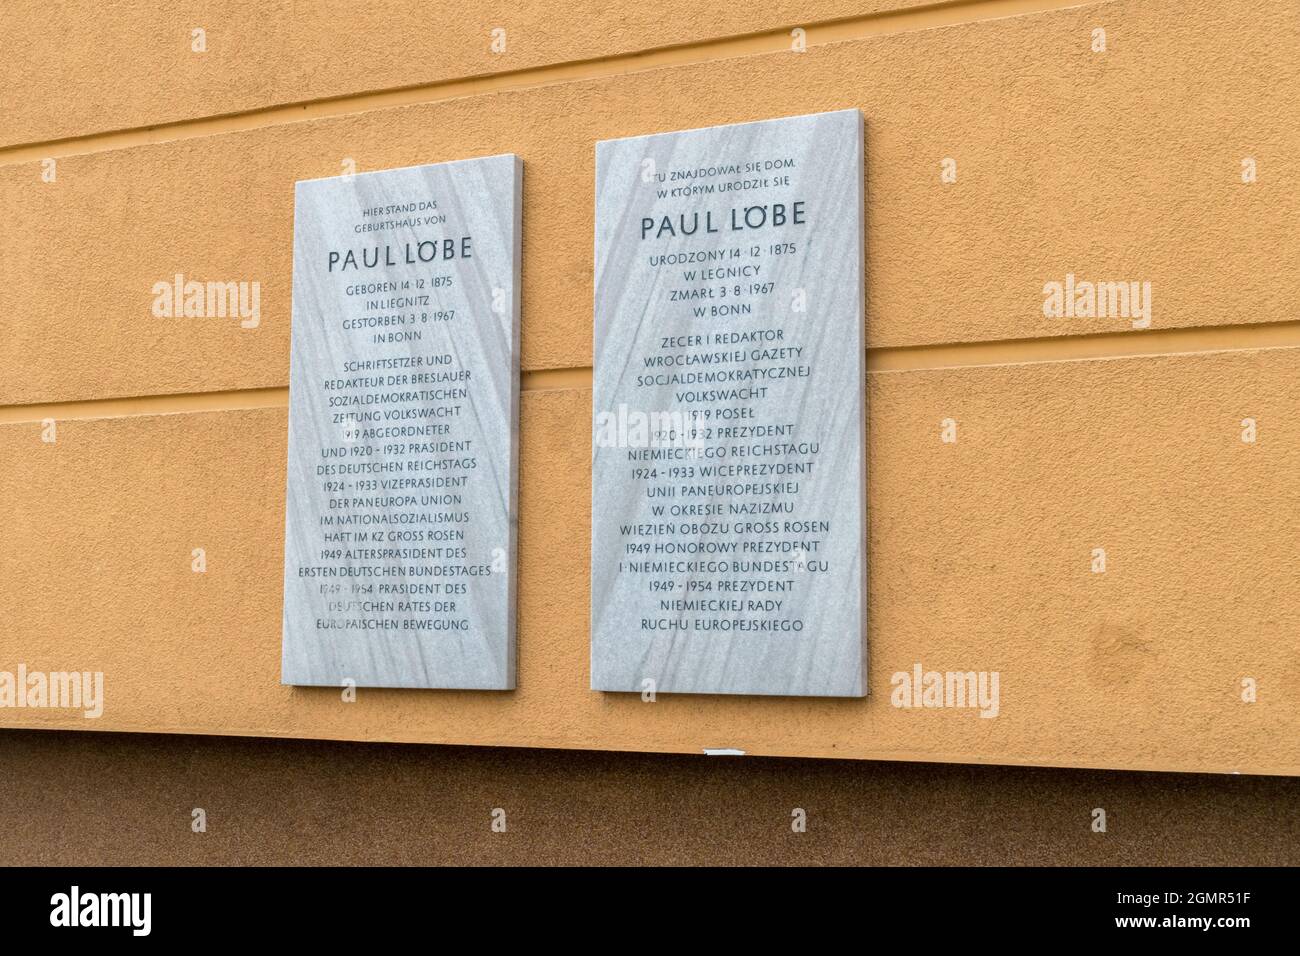 Legnica, Poland - June 1, 2021: Plaques informing about the birthplace of Paul Lobe. Stock Photo